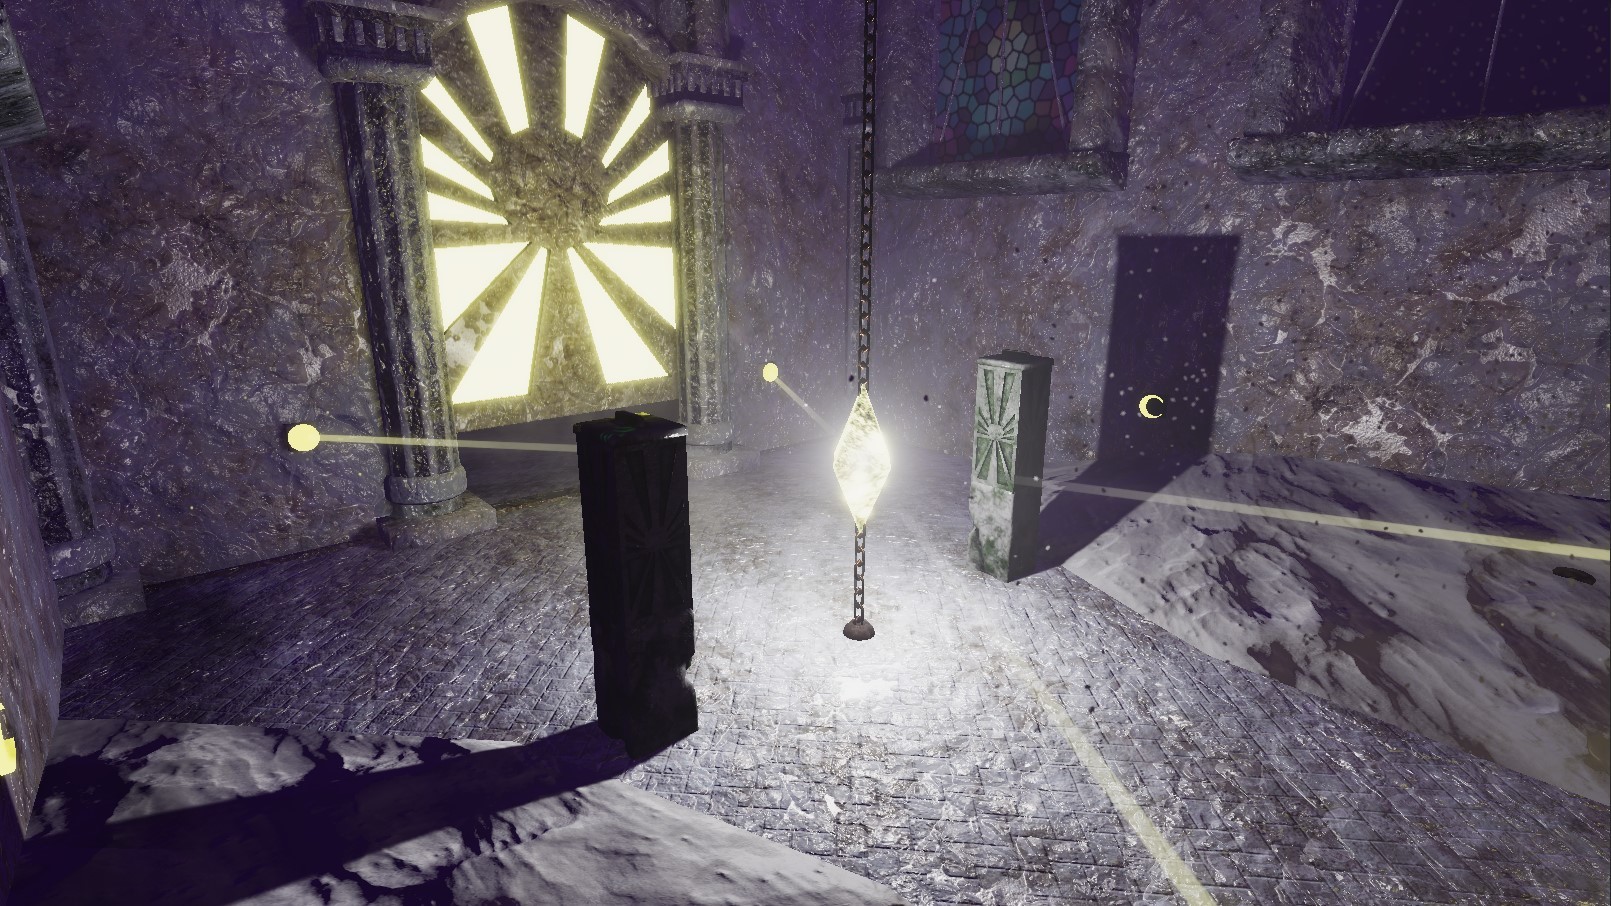 download games like quern and myst for free